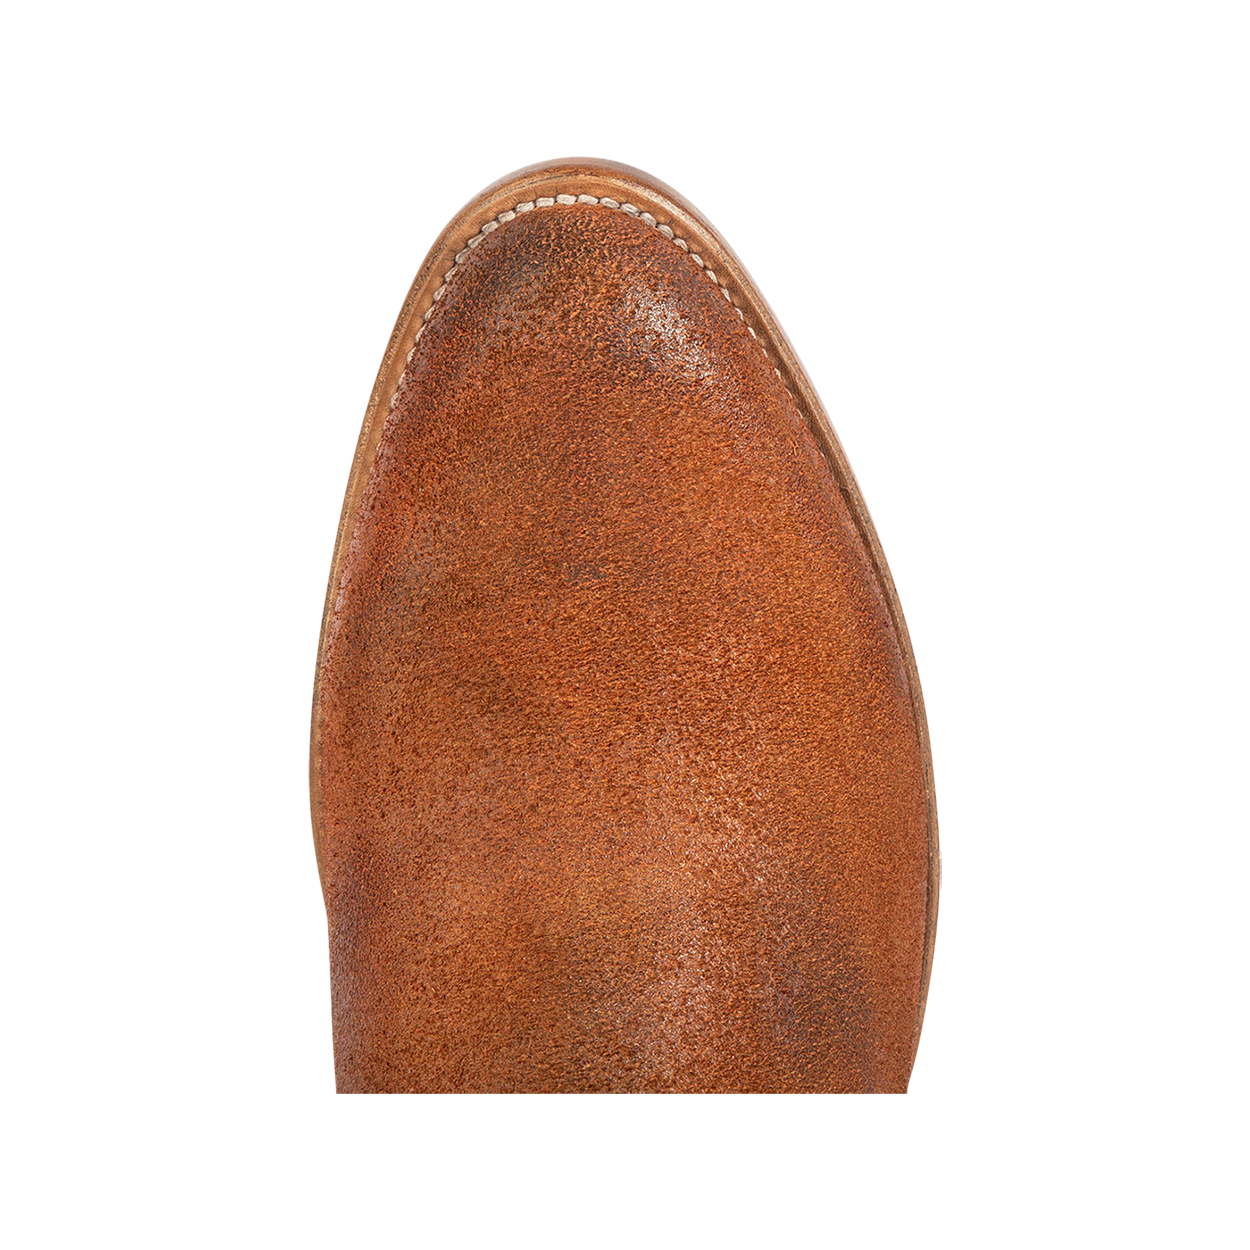 Top view showing traditional toe shape on FREEBIRD men's Henderson tan suede mid calf boot